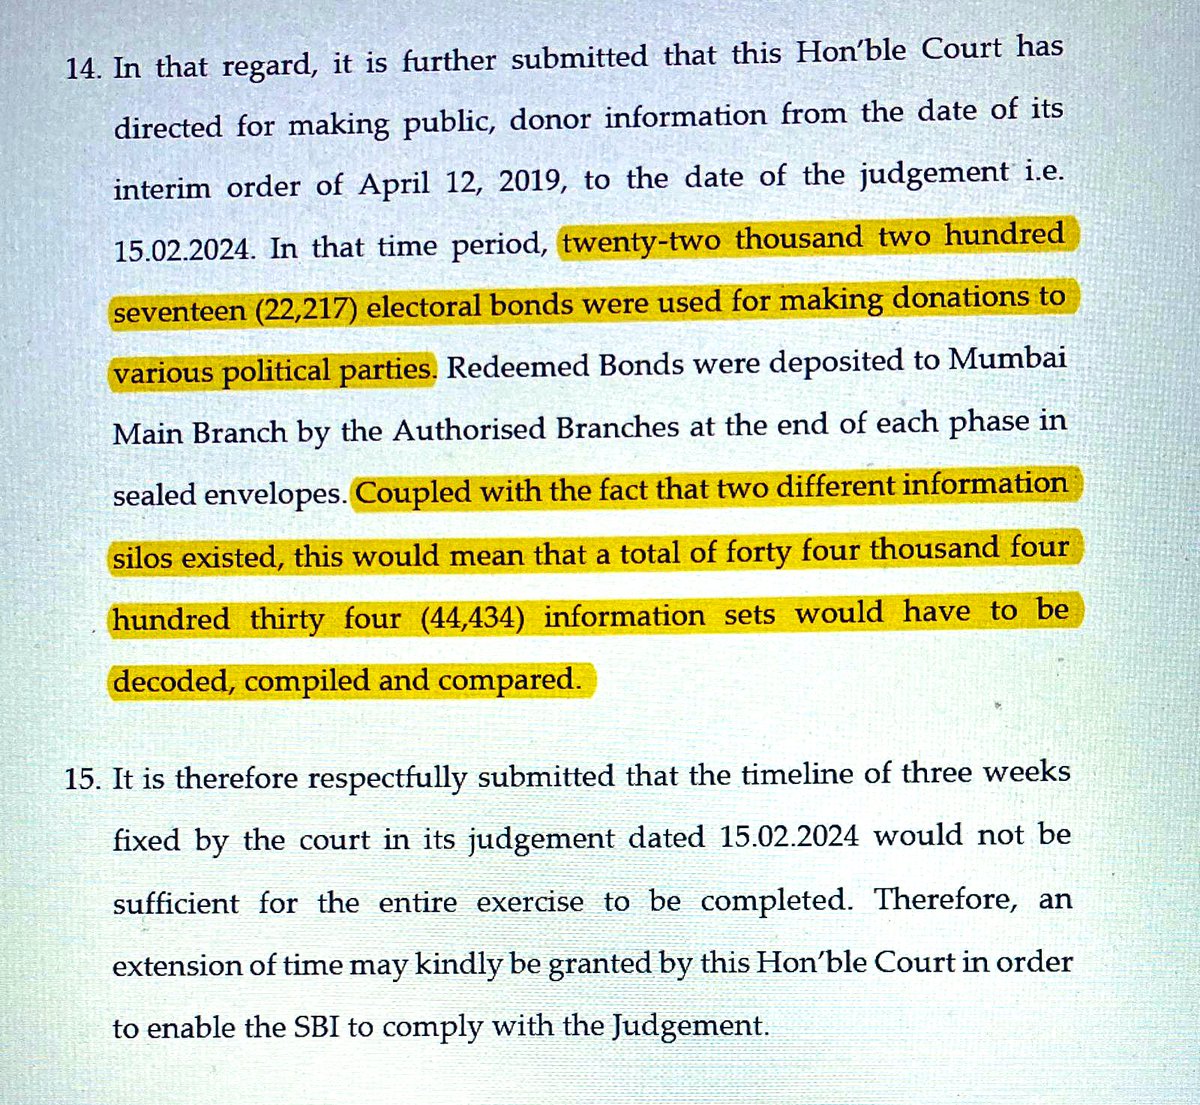 Donor names & redemption details of #ElectoralBonds are both available in SBI’s Mumbai Branch in sealed cover as per their affidavit. Why is SBI not disclosing these immediately? Claim that it needs 4 months to match purchaser & redeemer info for 22,217 bonds is ridiculous!